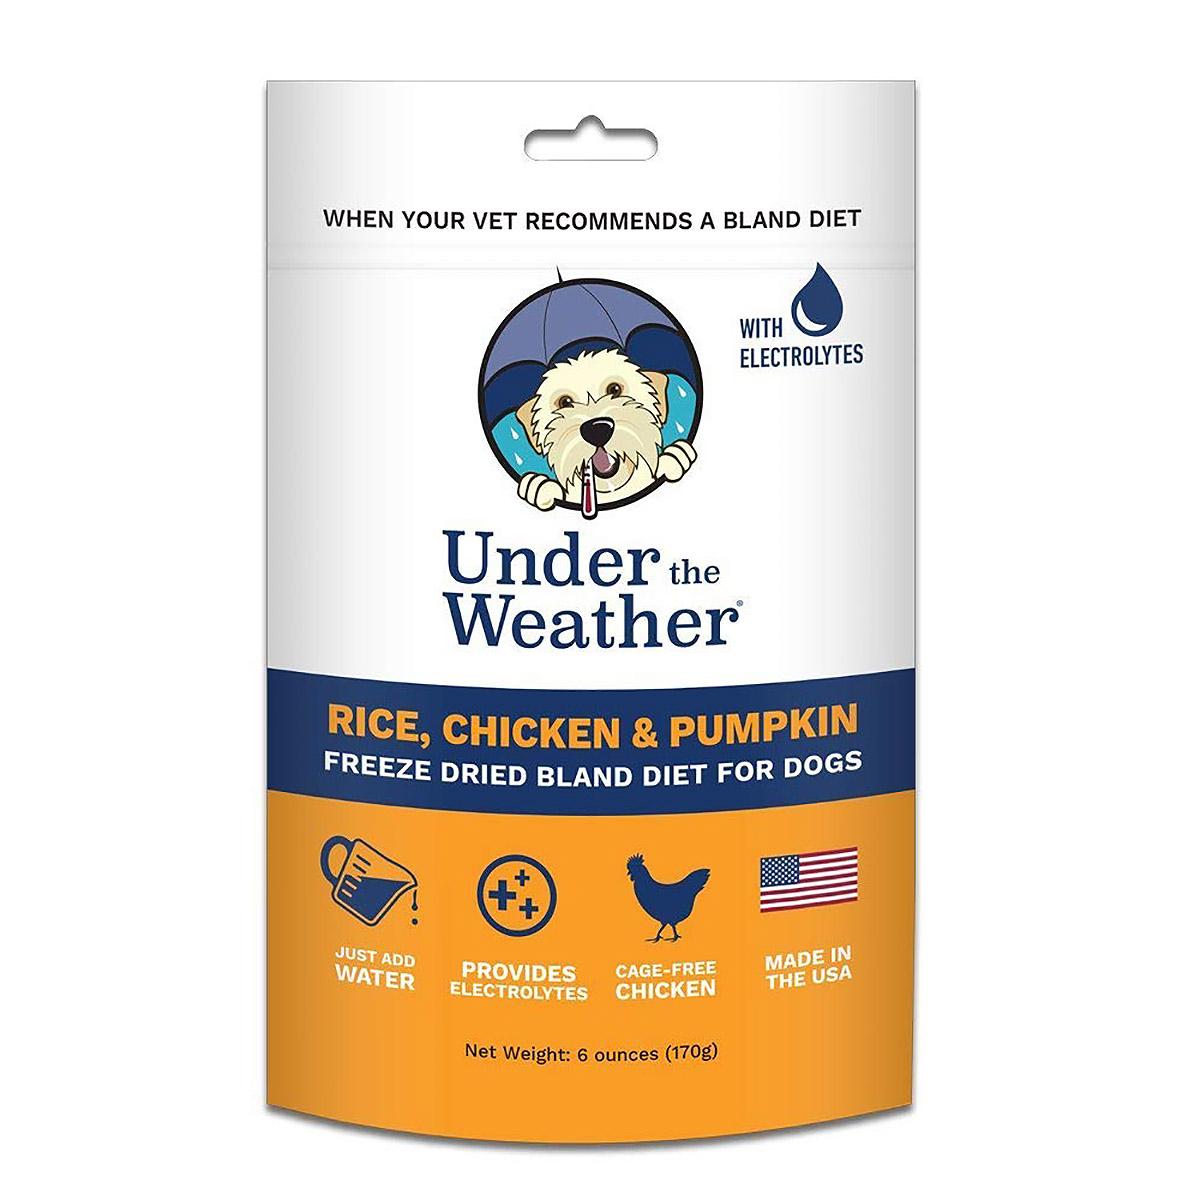 Under the Weather Freeze-Dried Bland Diet for Dogs - Rice, Chicken and Pumpkin